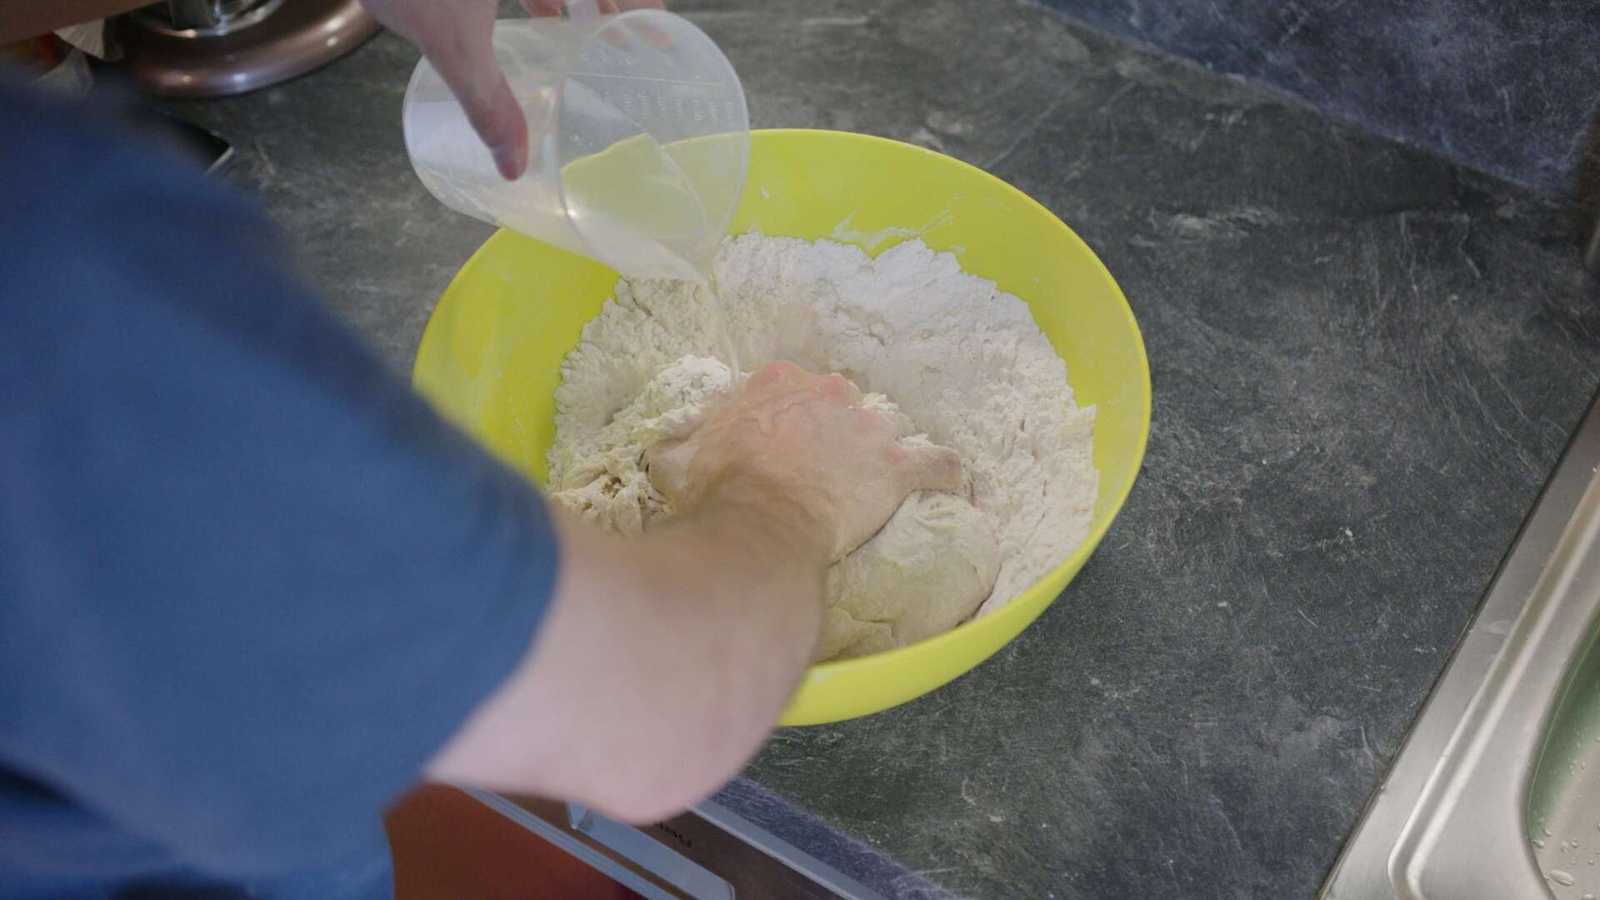 Watter getting added to dough